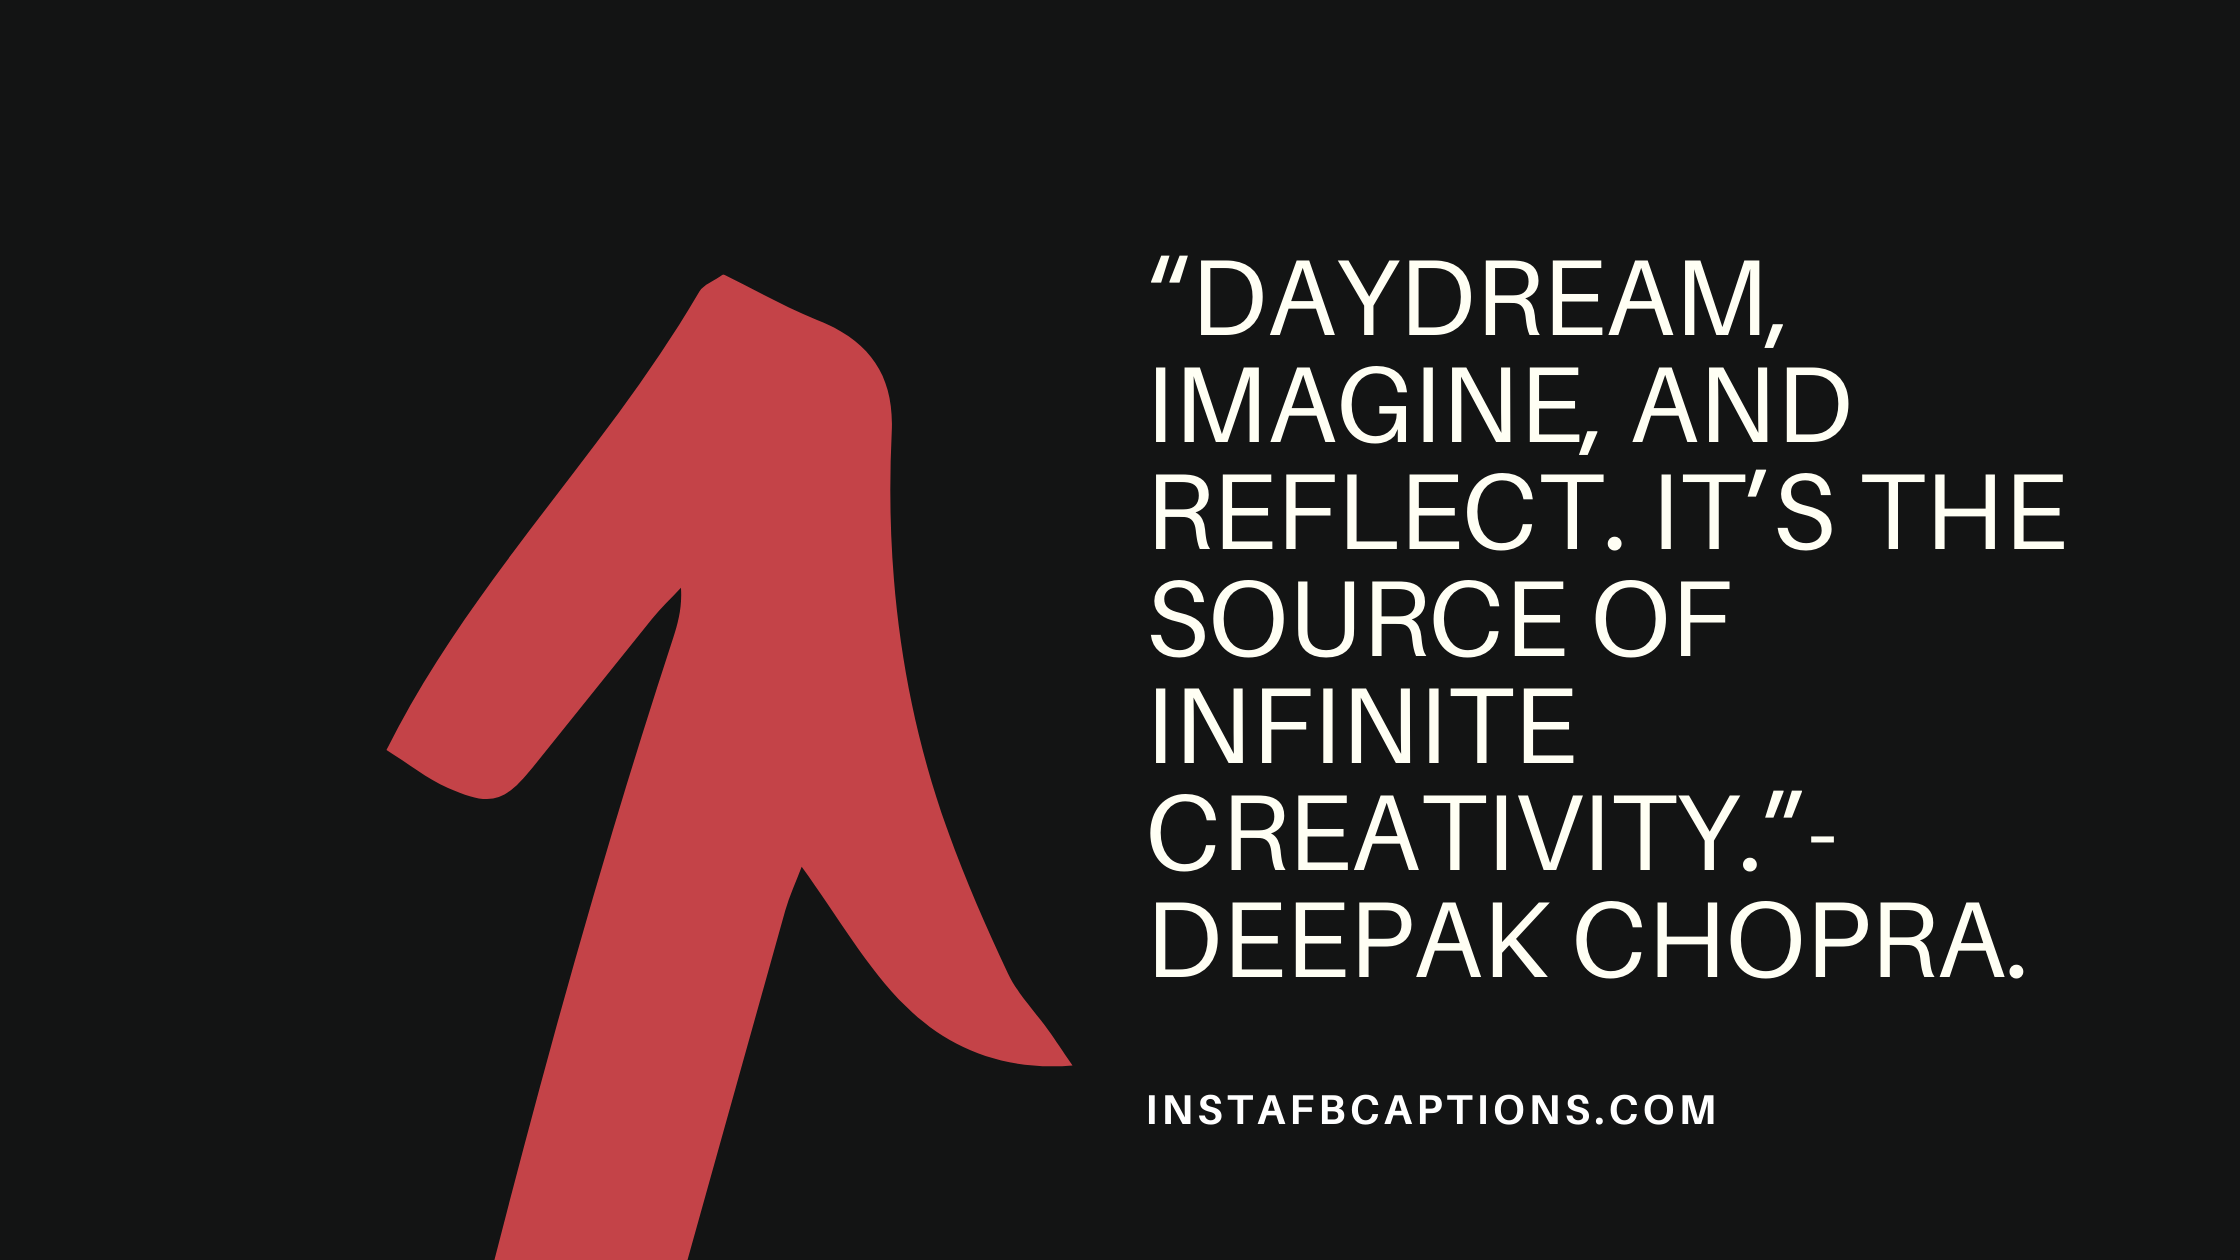 "Daydream, imagine, and reflect. It’s the source of infinite creativity." - Deepak Chopra  - Daydream Quotes - 85 Dream Captions, Quotes &#038; Hashtags For Instagram